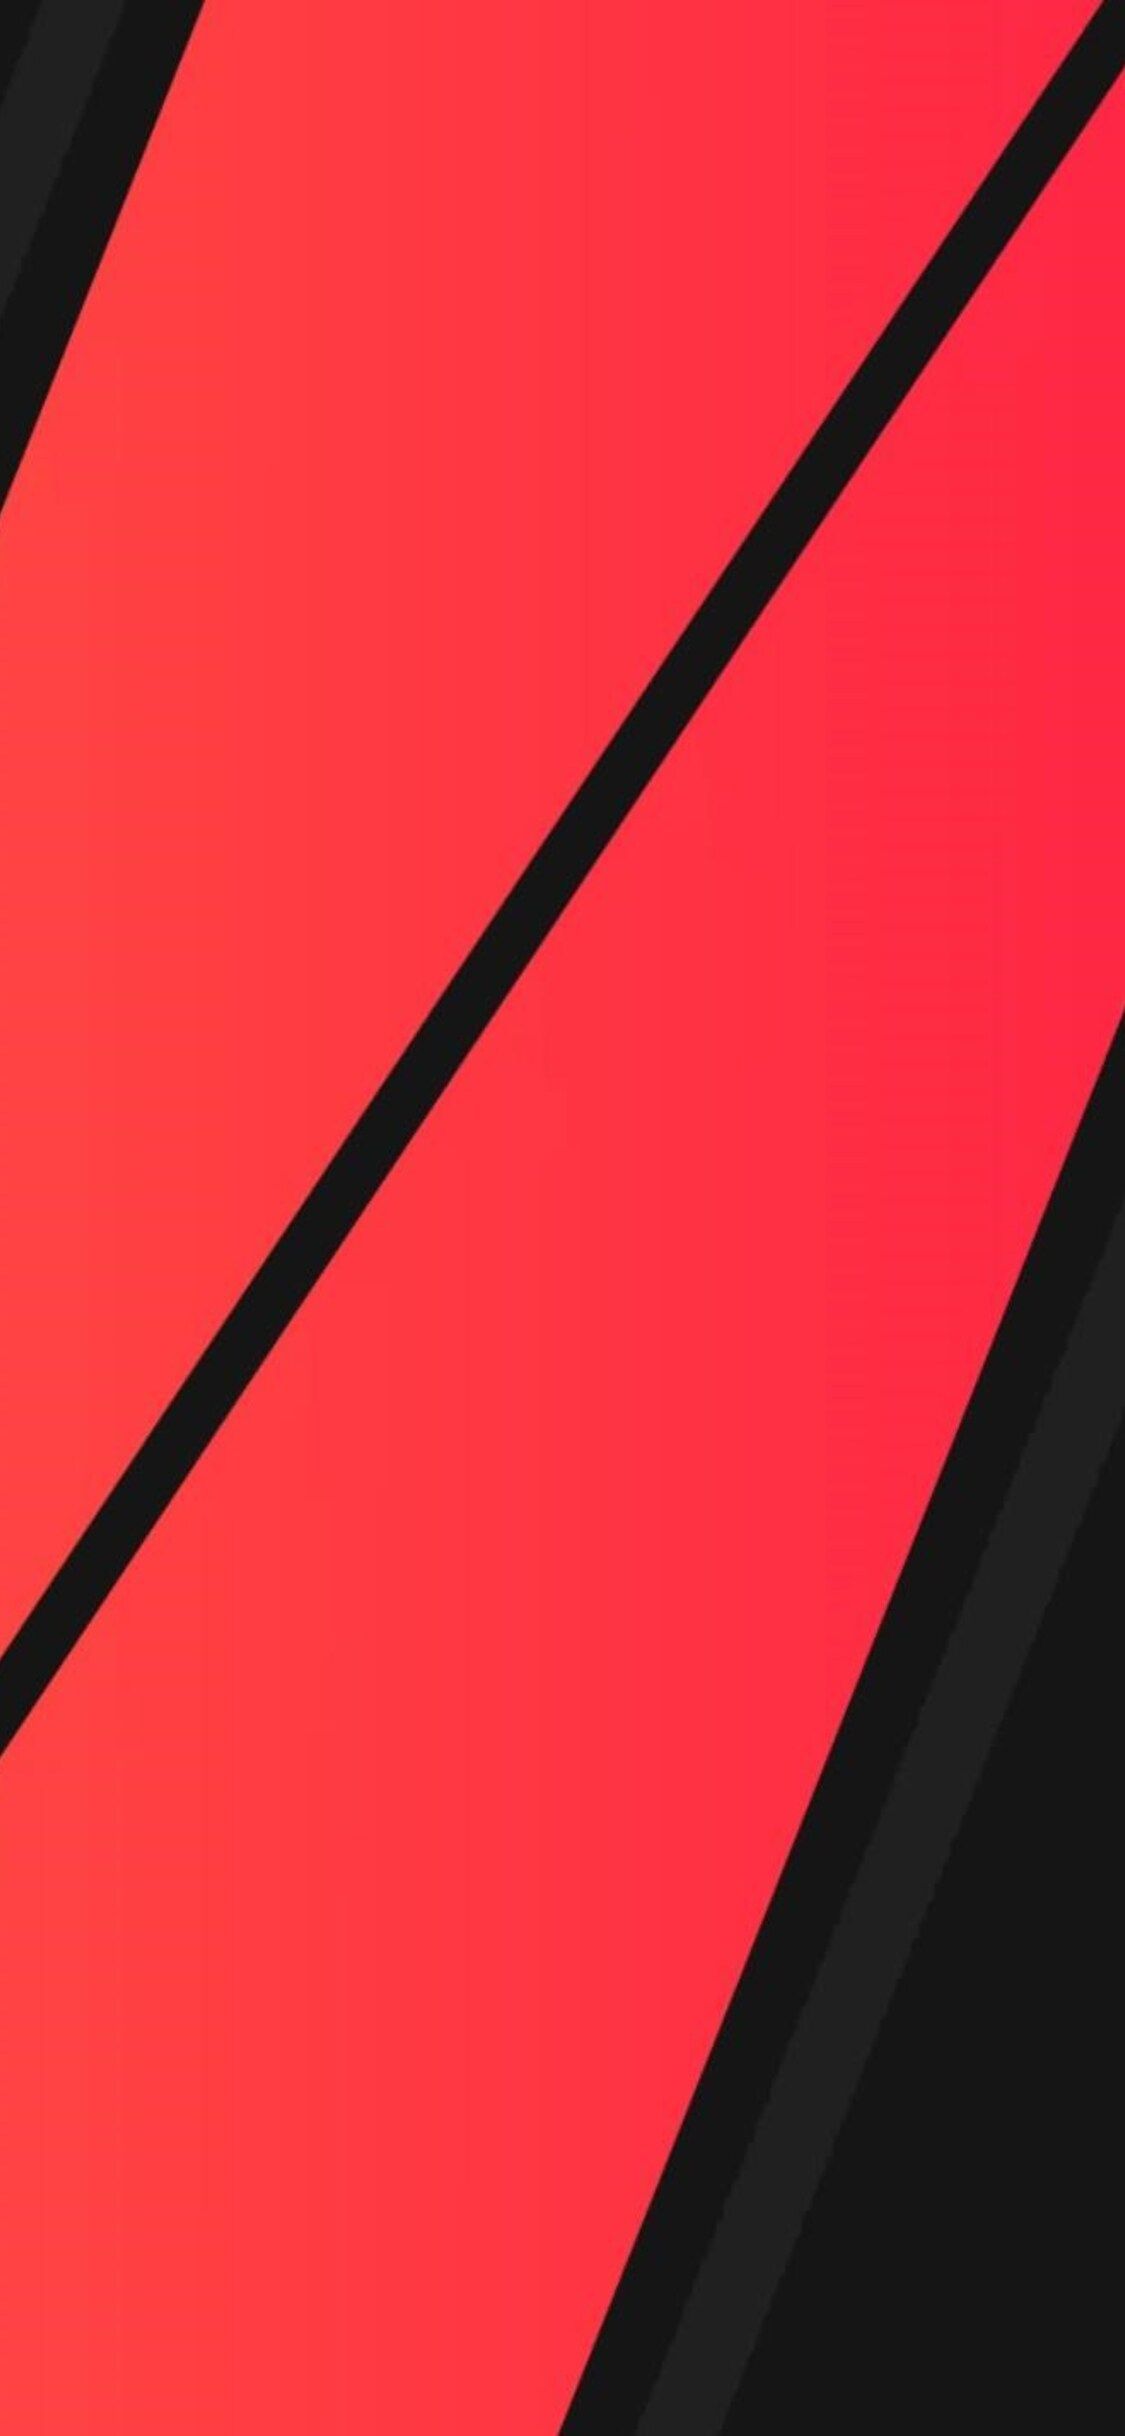 Black And Red Minimalist Wallpapers - Wallpaper Cave